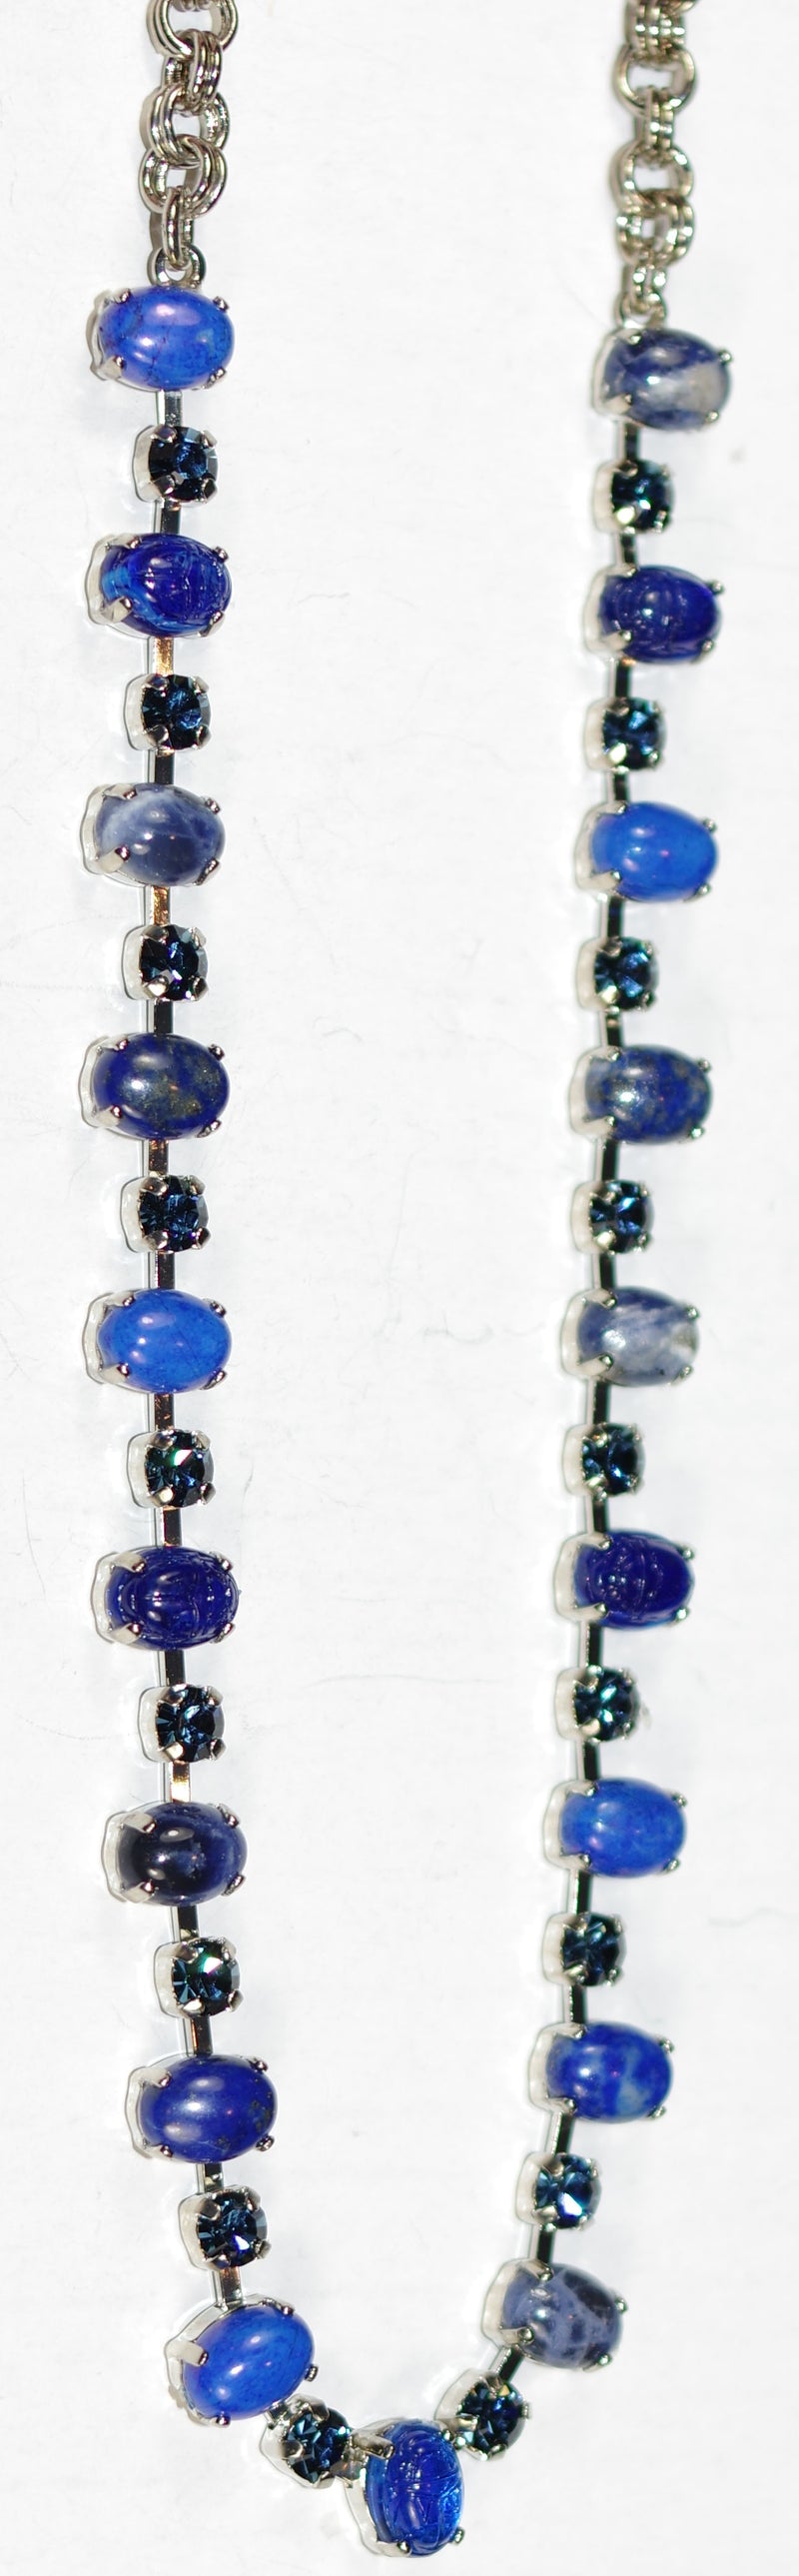 MARIANA NECKLACE SLEEPTIME: blue, navy crystal and natural stones in silver rhodium setting, 18" adjustable chain